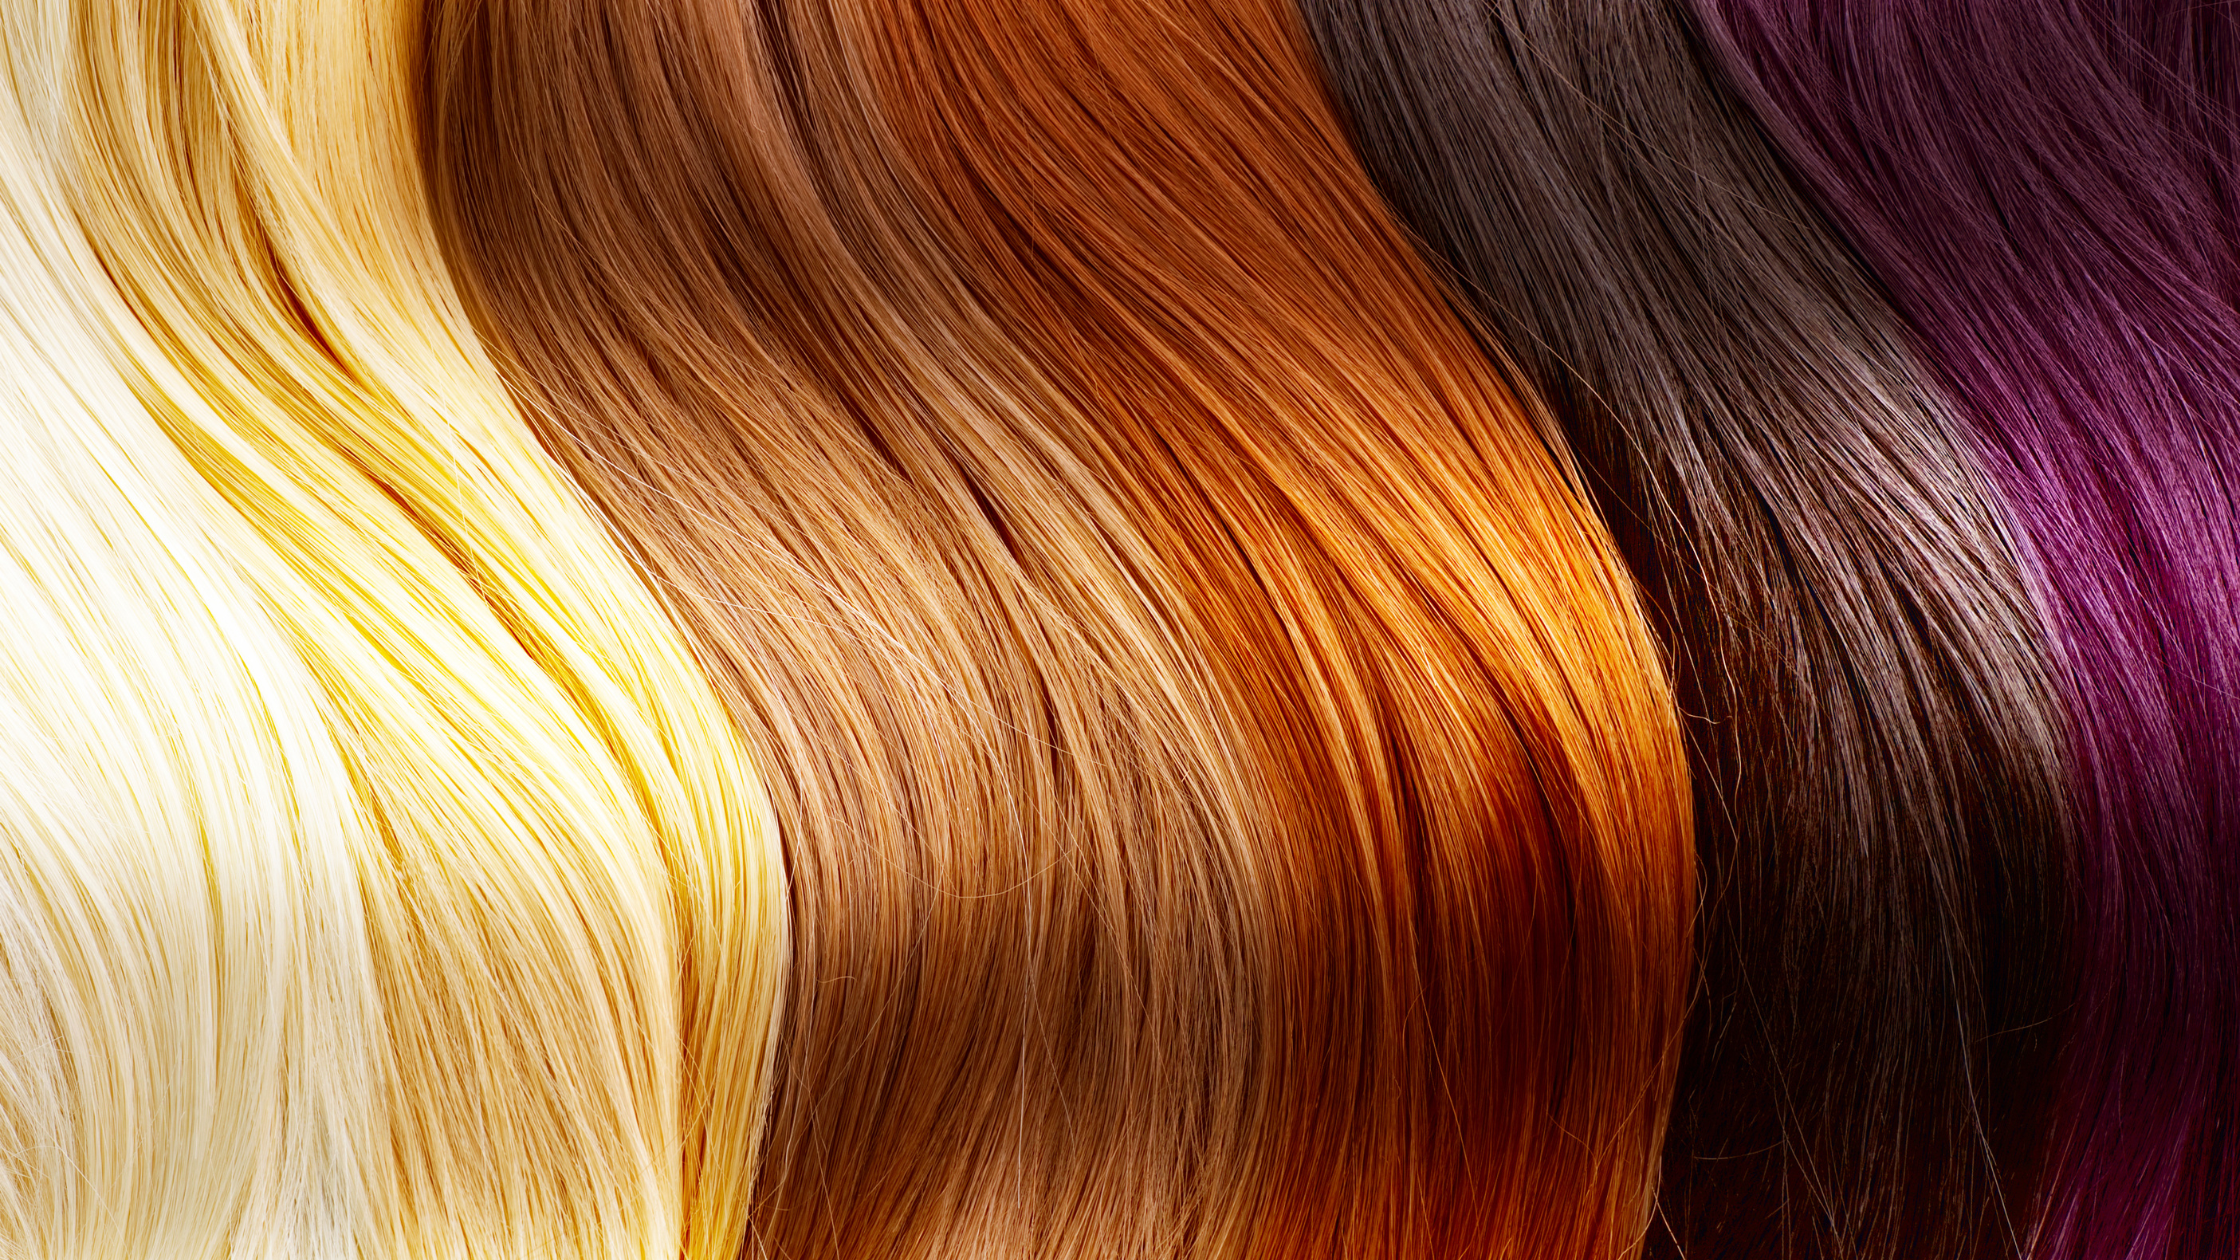 How You Can Have A Successful Color Consultation With A Client